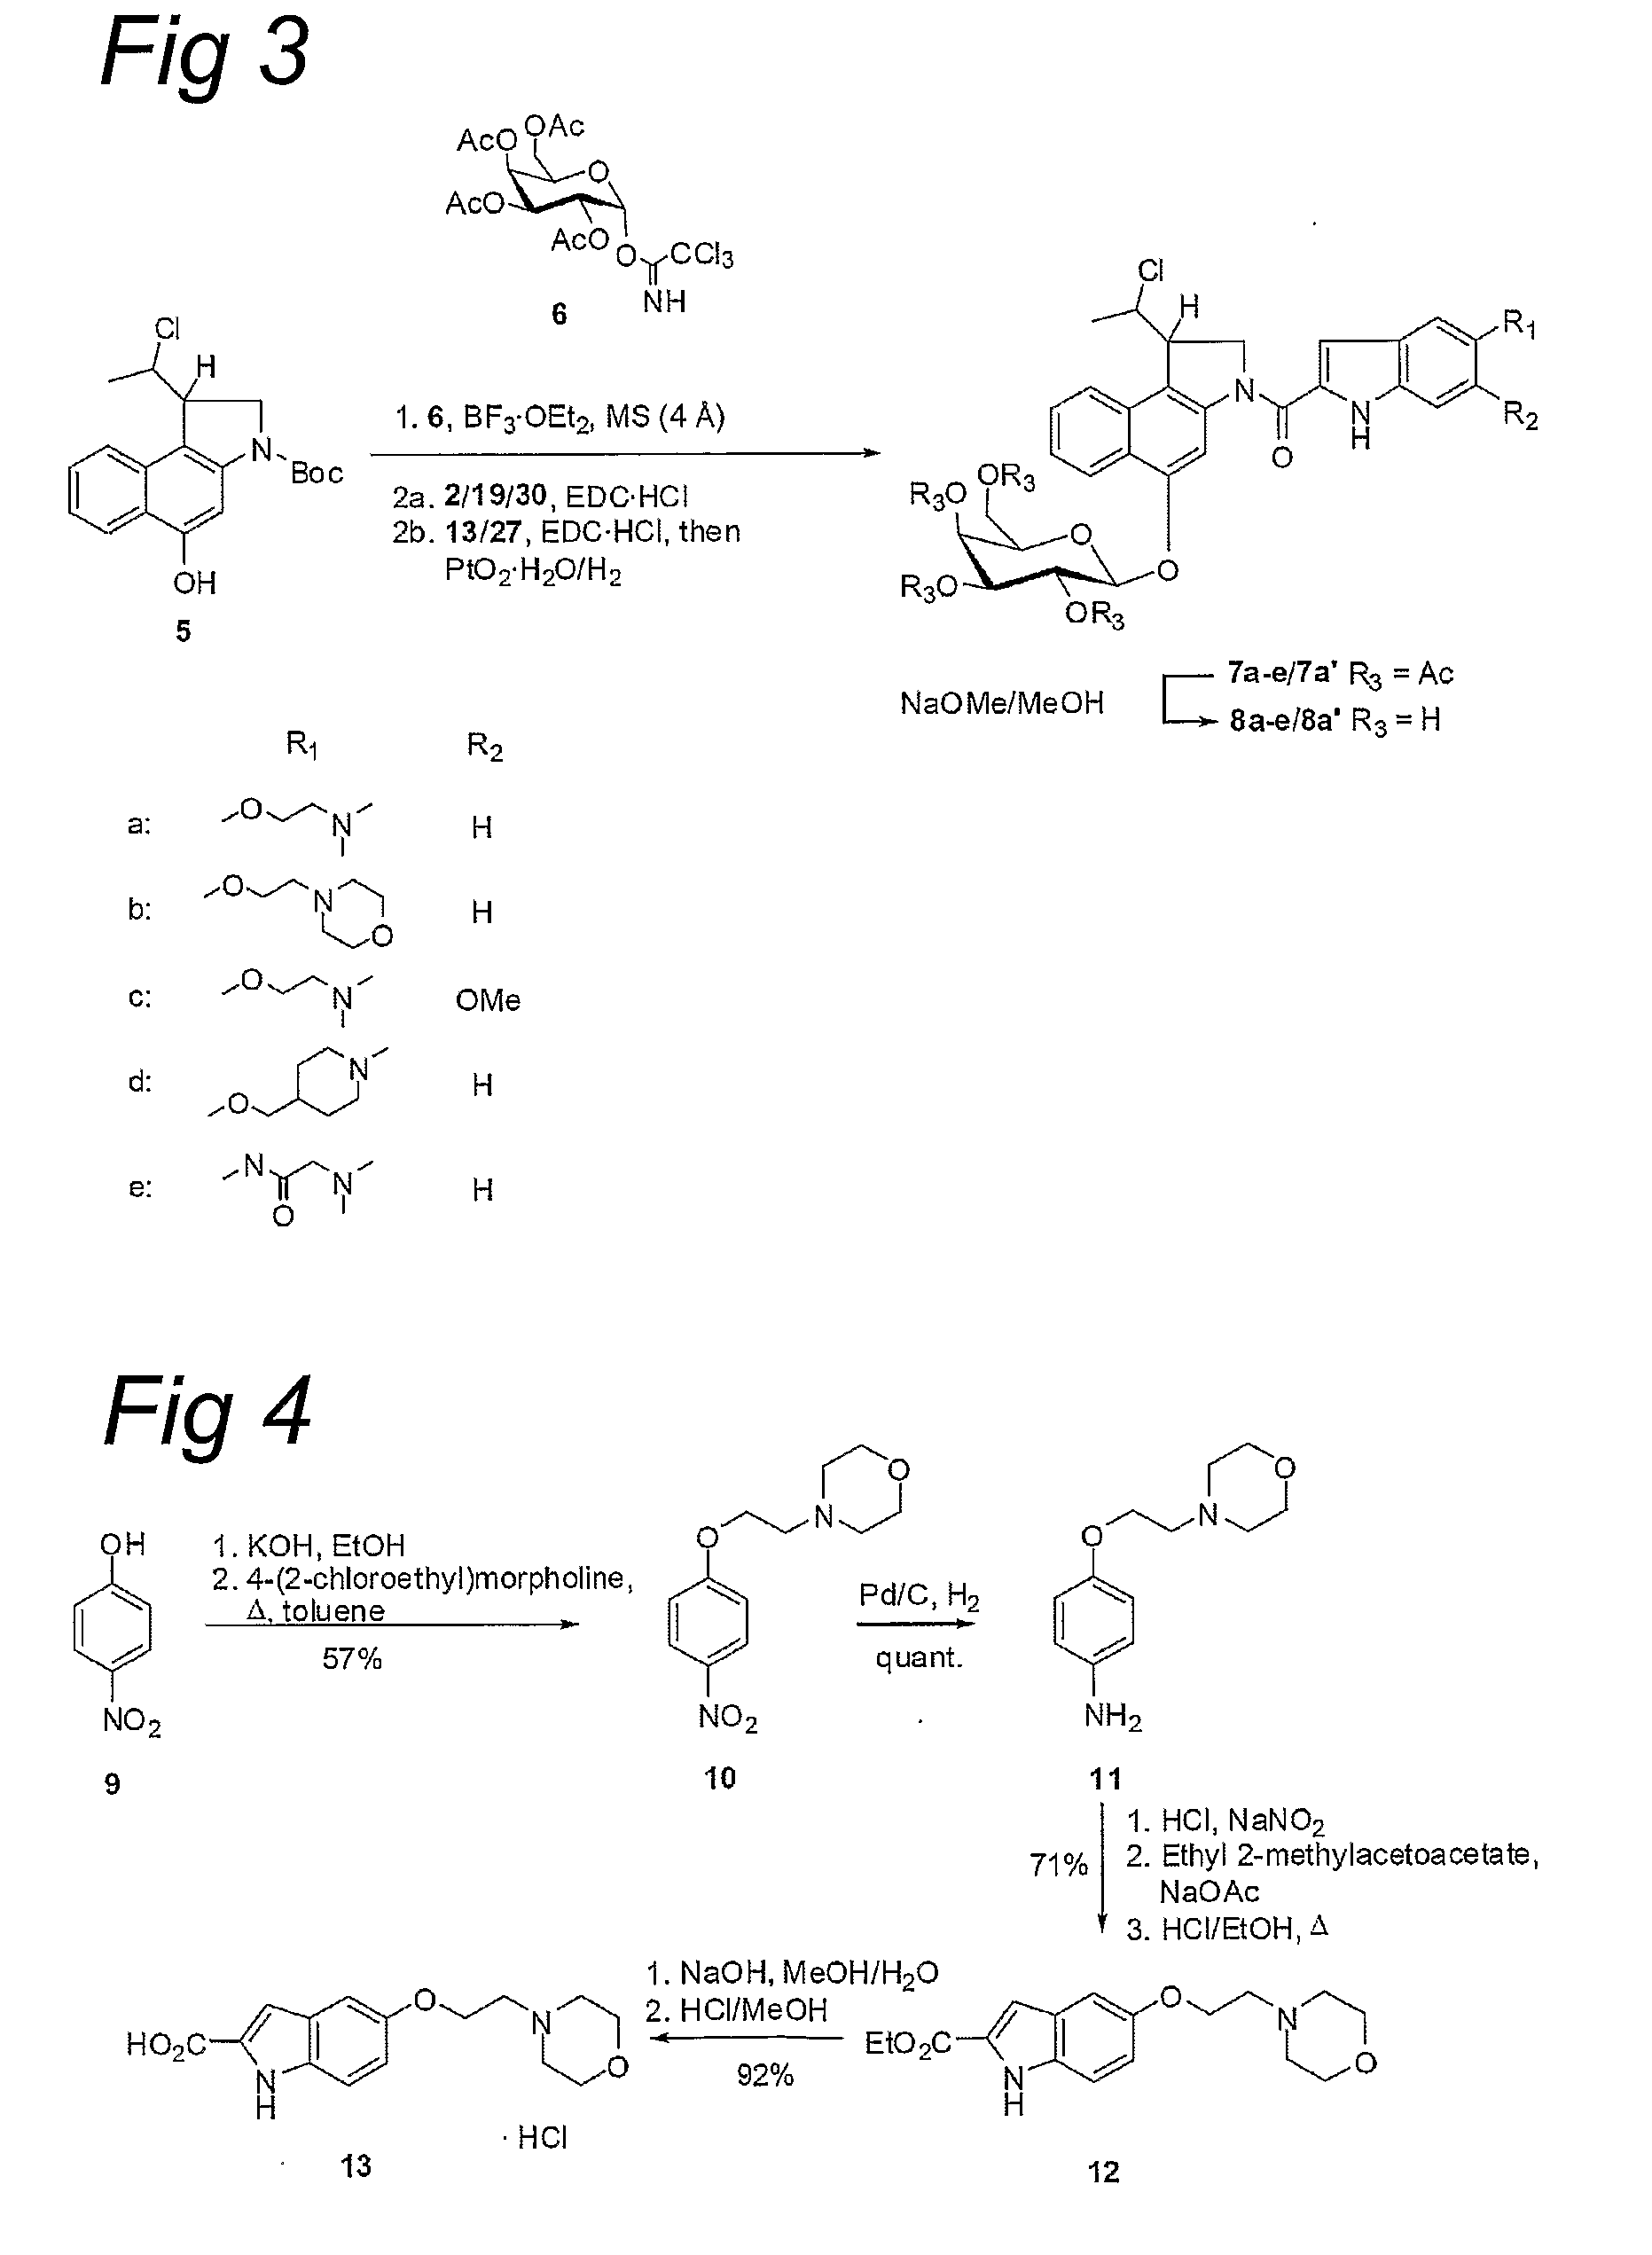 Water-Soluble CC-1065 Analogs and Their Conjugates